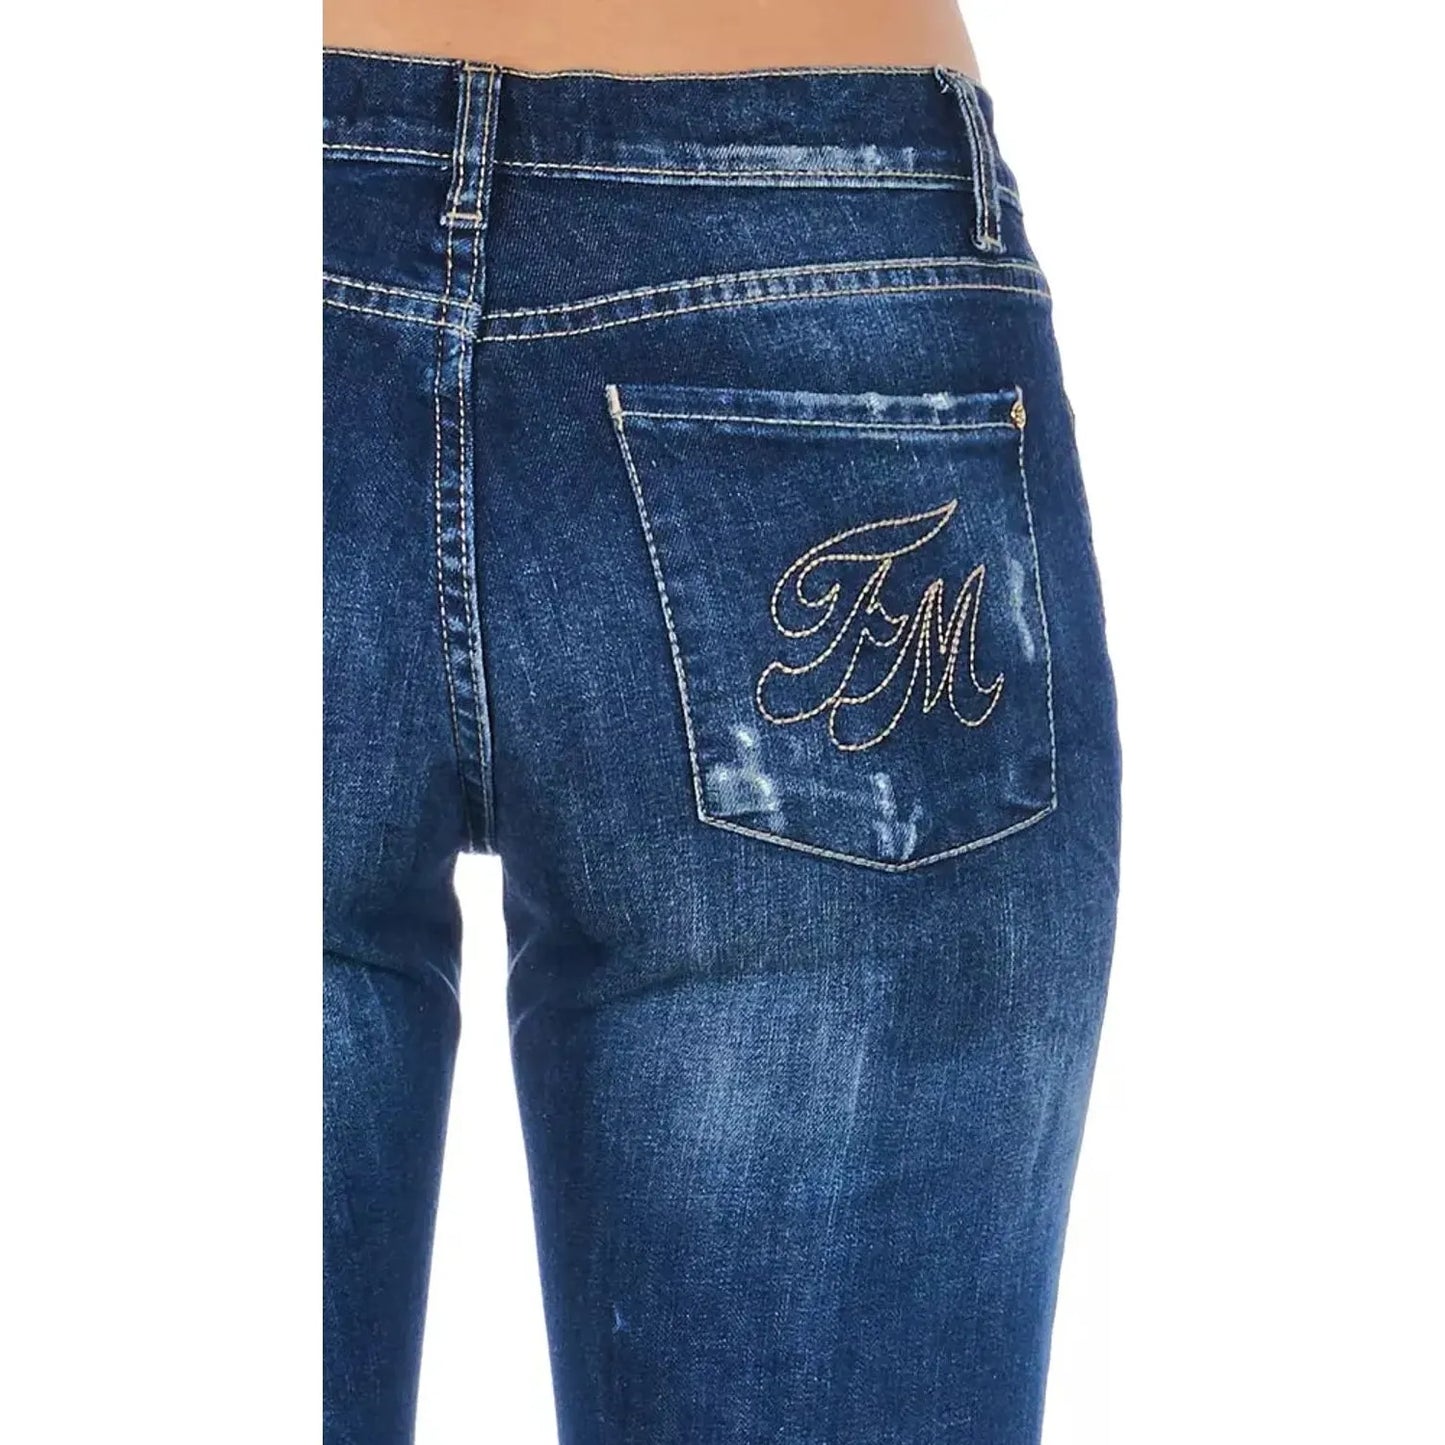 Frankie Morello Chic Worn Wash Skinny Denim Jeans blue-cotton-jeans-pant-52 product-21764-2005750439-20-bded2b46-cdd.webp